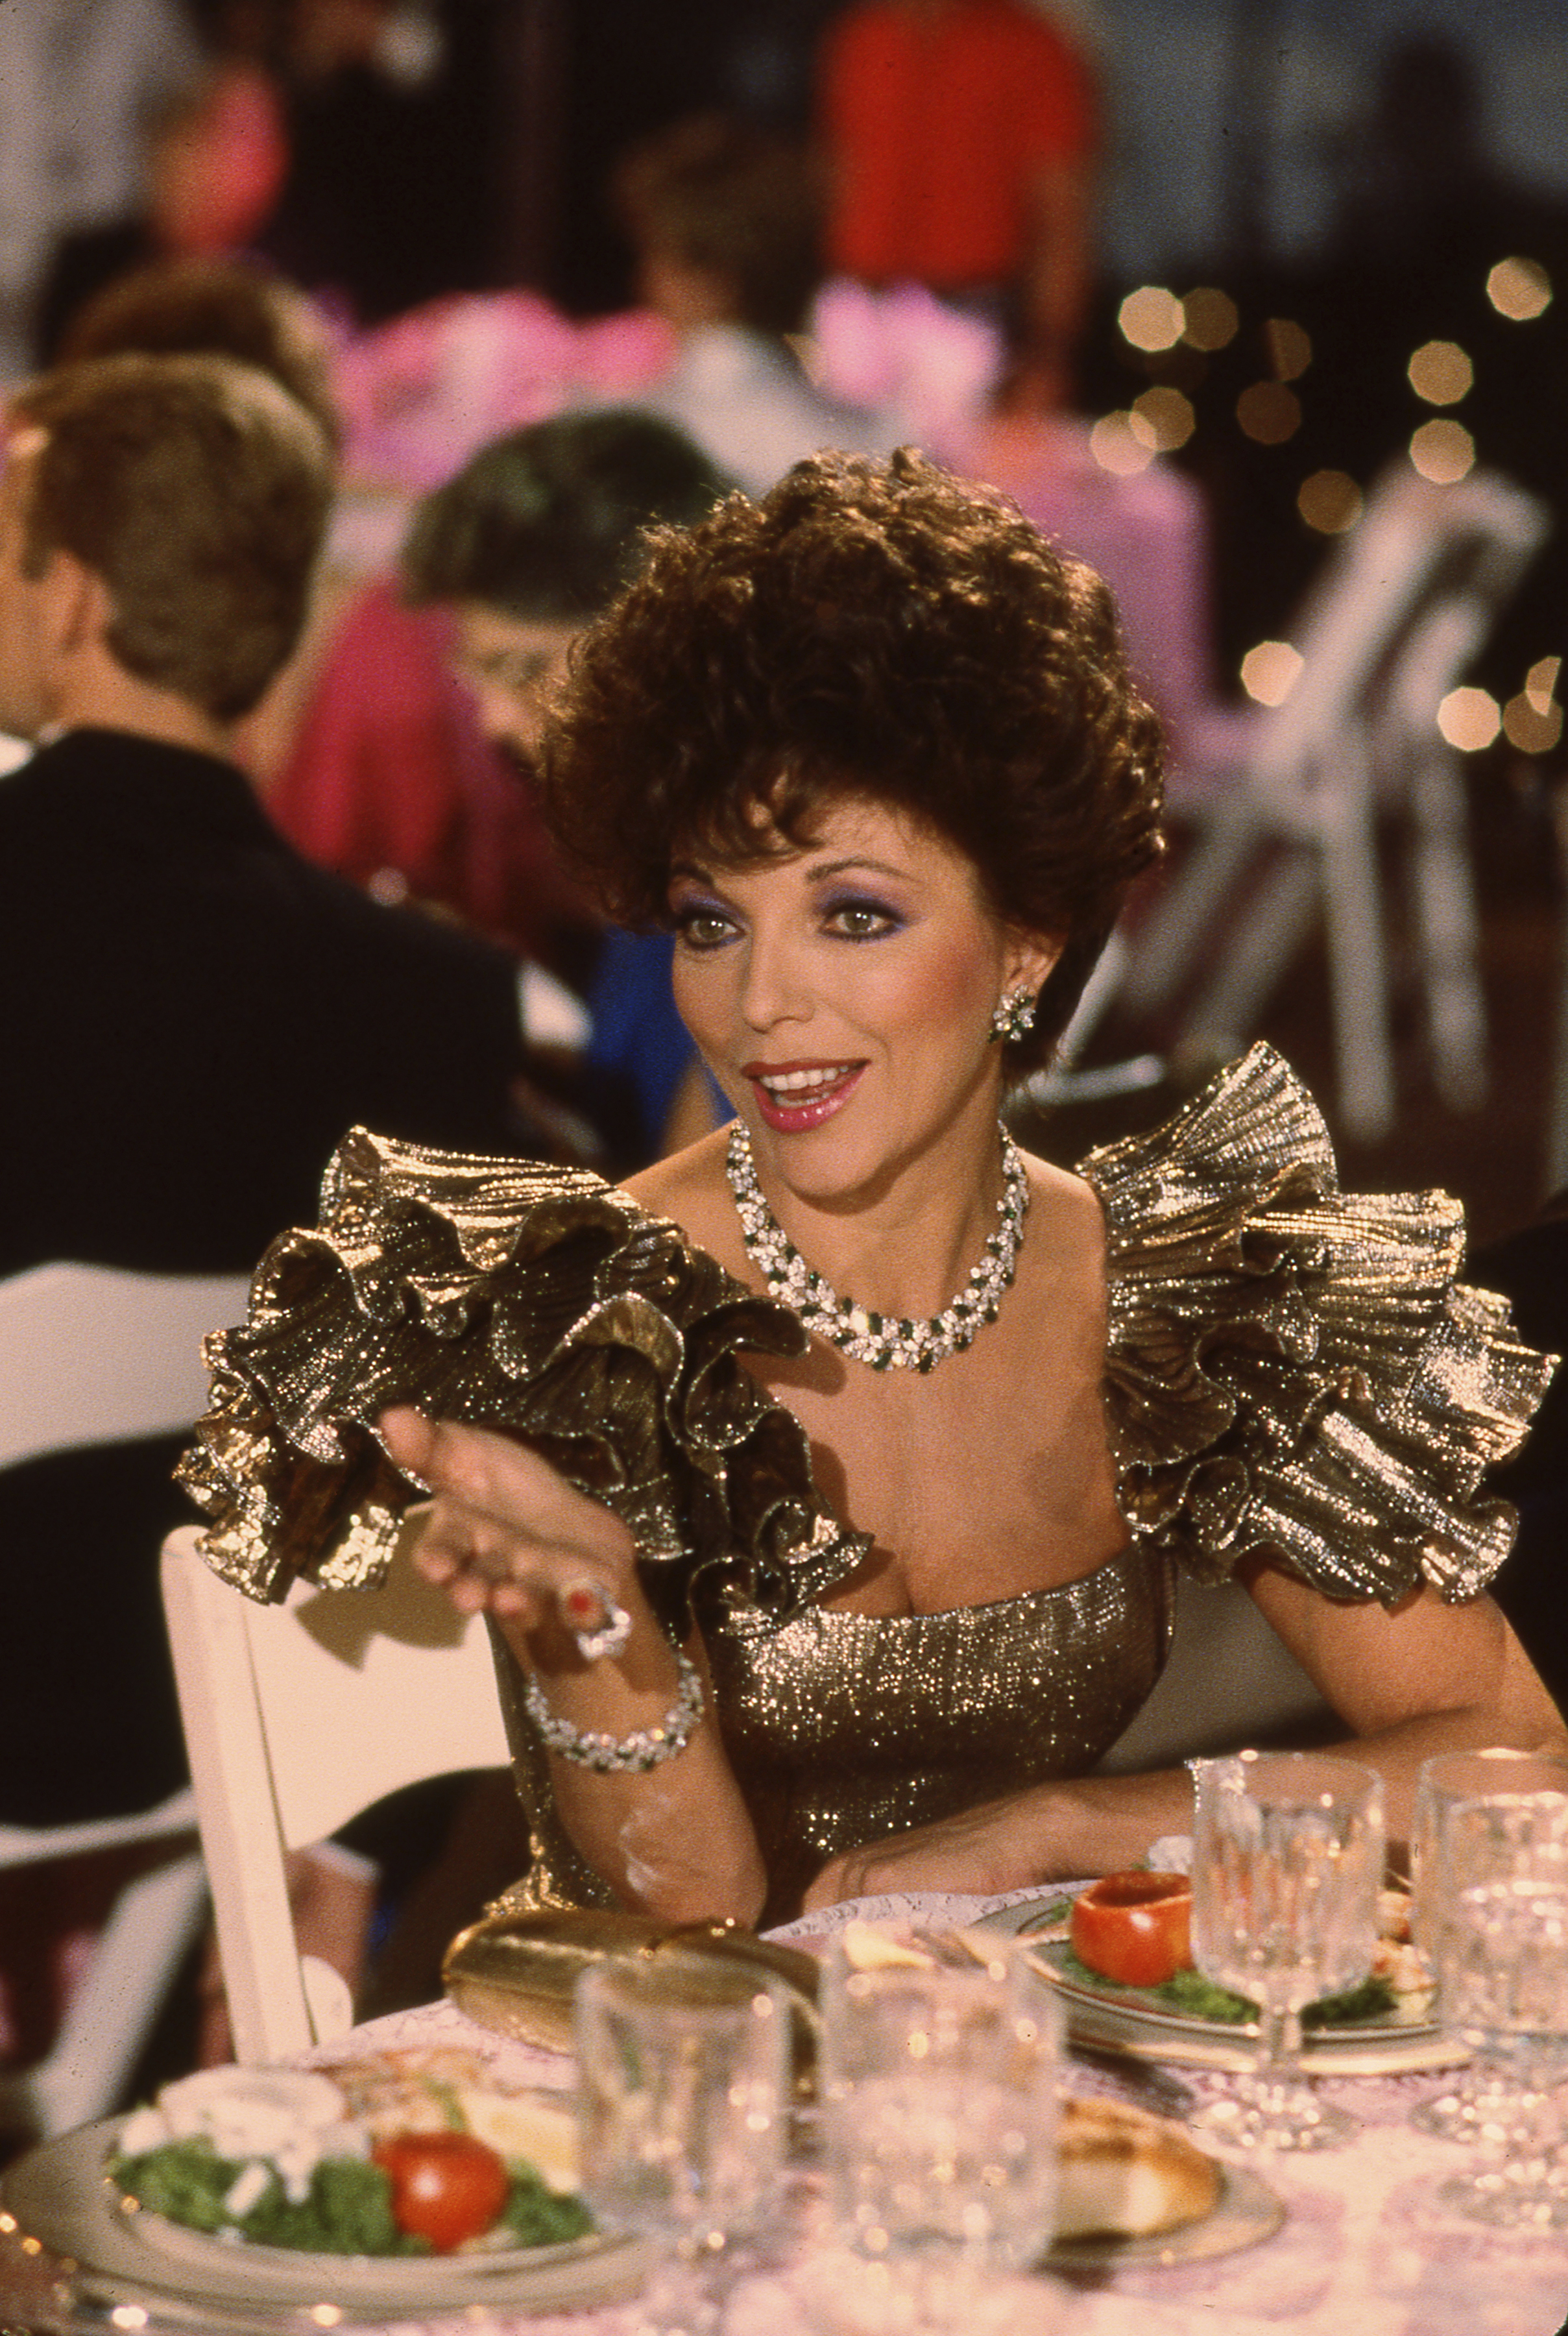 British born TV and movie actress Joan Collins on the set of the soap opera "Dynasty" in which she payed the scheming Alexis Carrington, in Hollywood in 1985. | Source: Getty Images